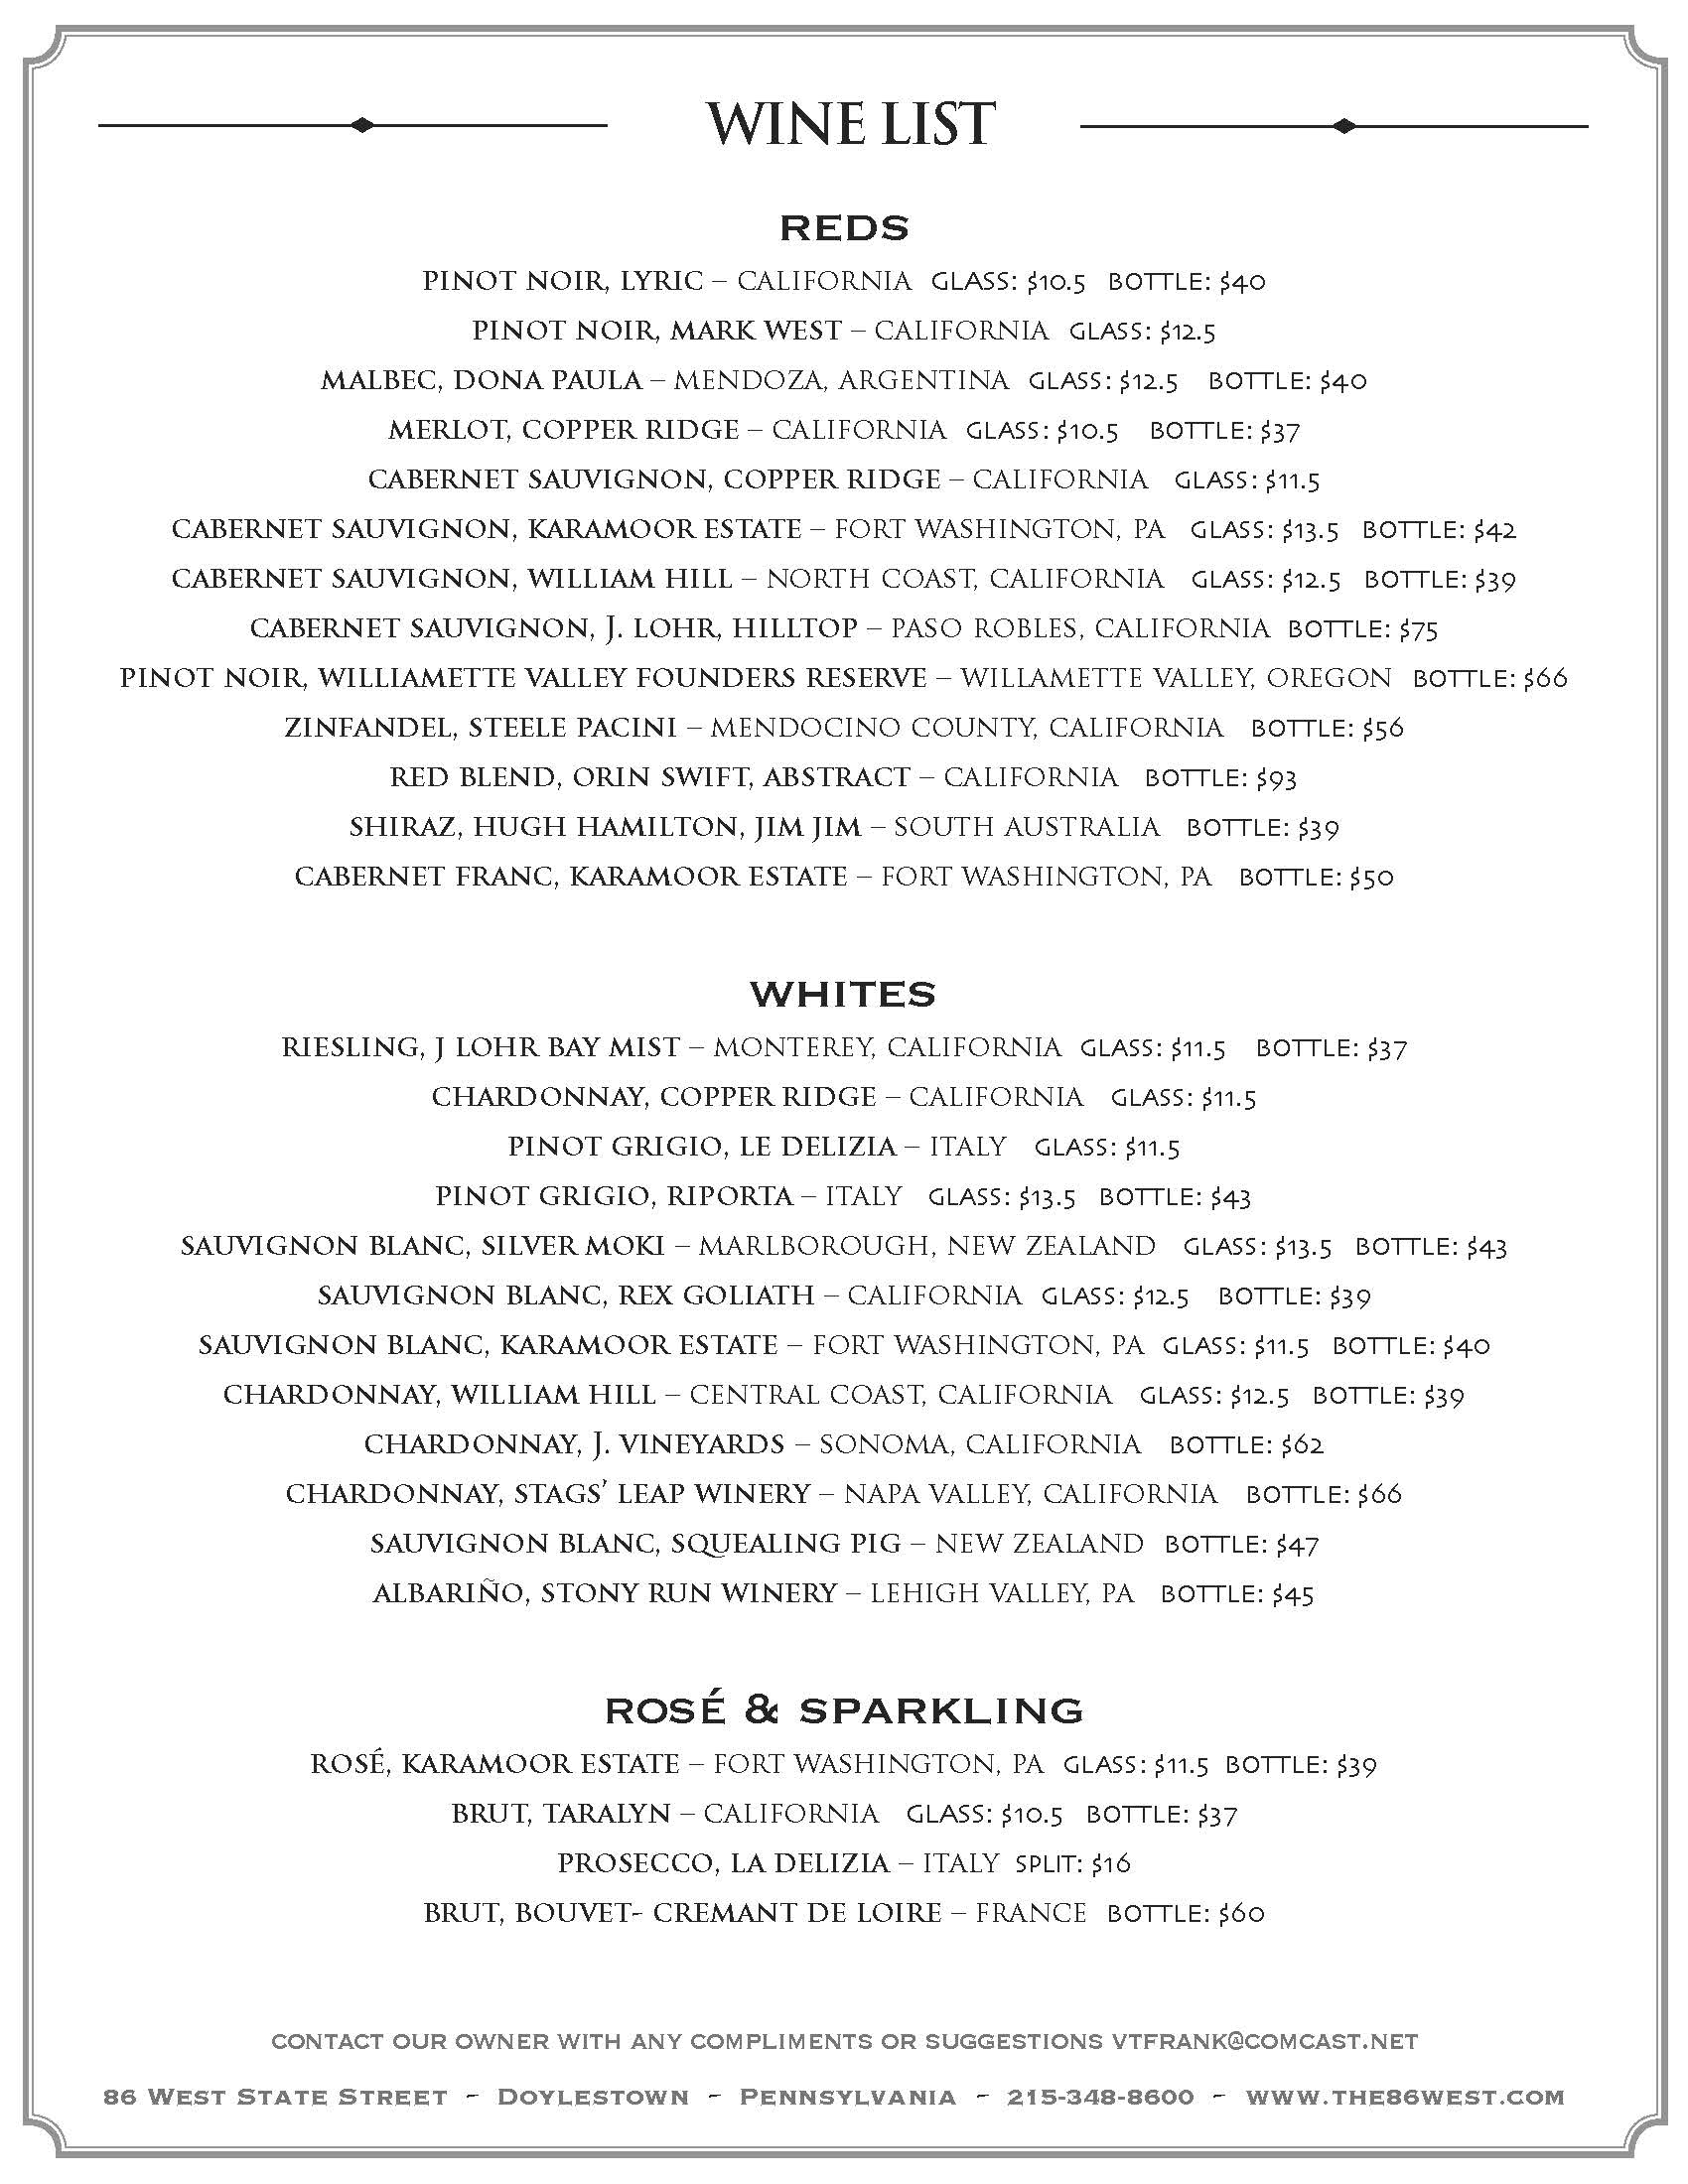 A wine list with the names of the wines.